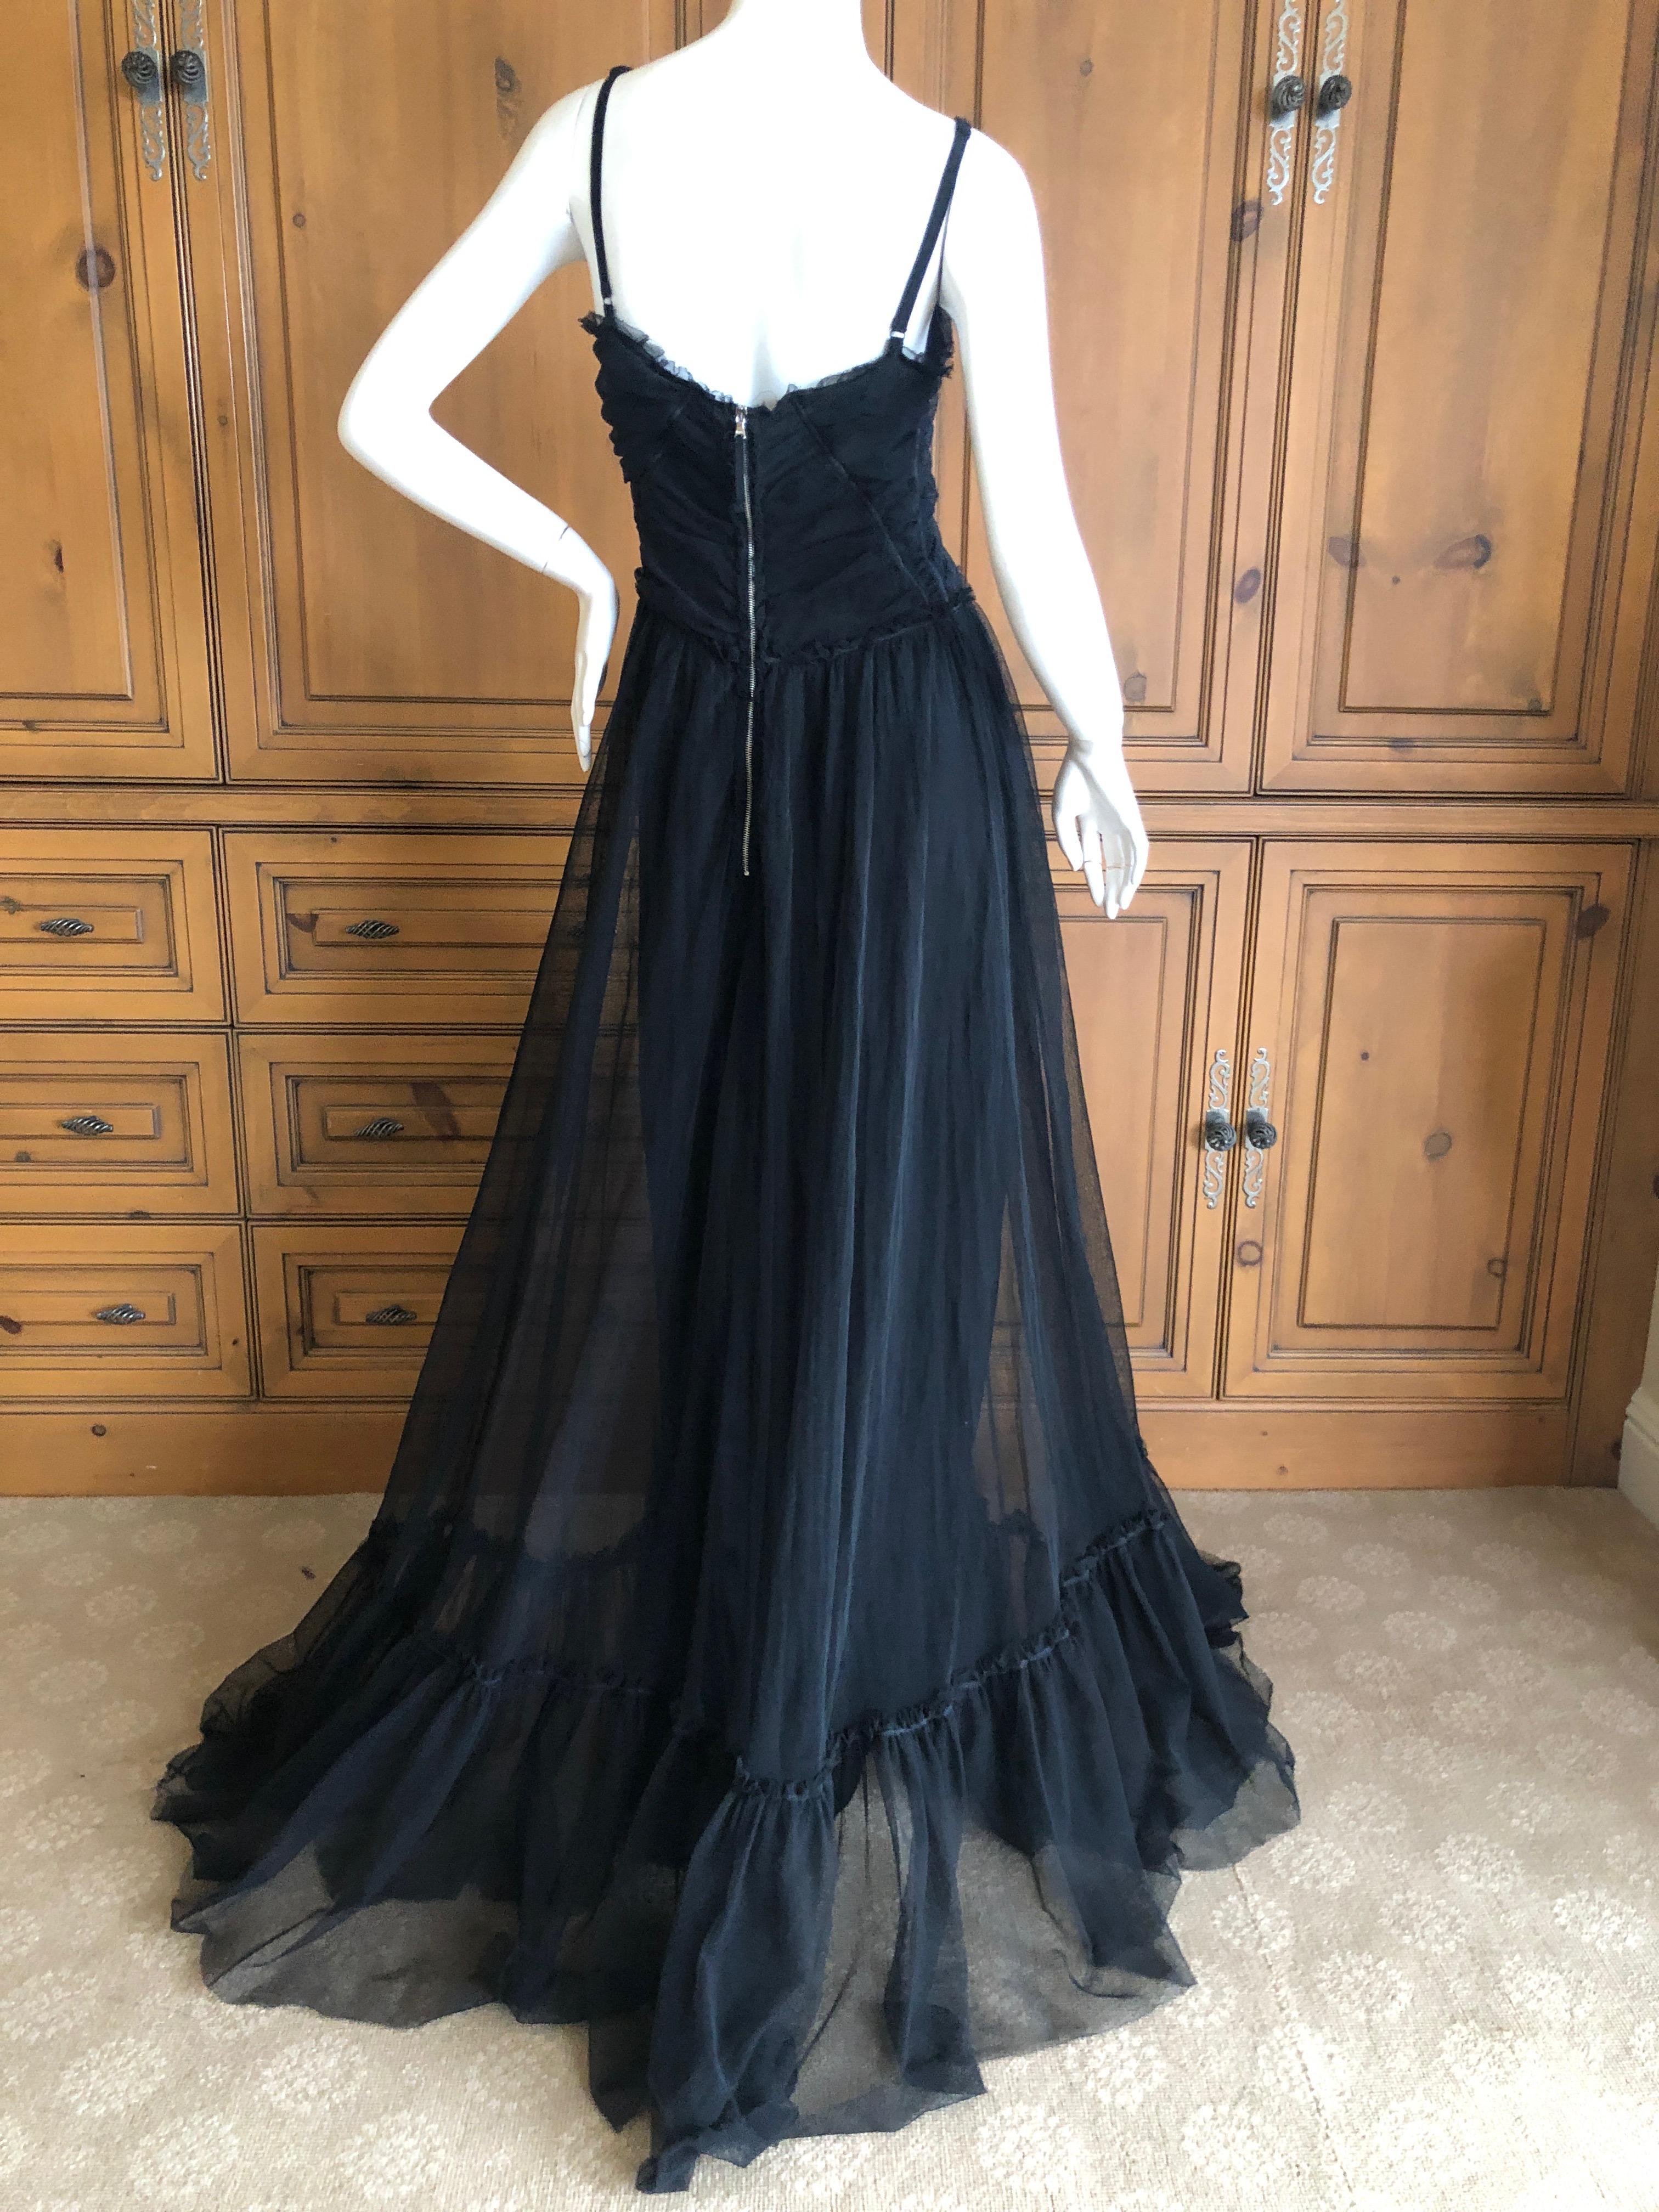 Dolce & Gabbana D&G Vintage Goth Black Morticia Gown with Flowing Long Skirt 44  For Sale 1